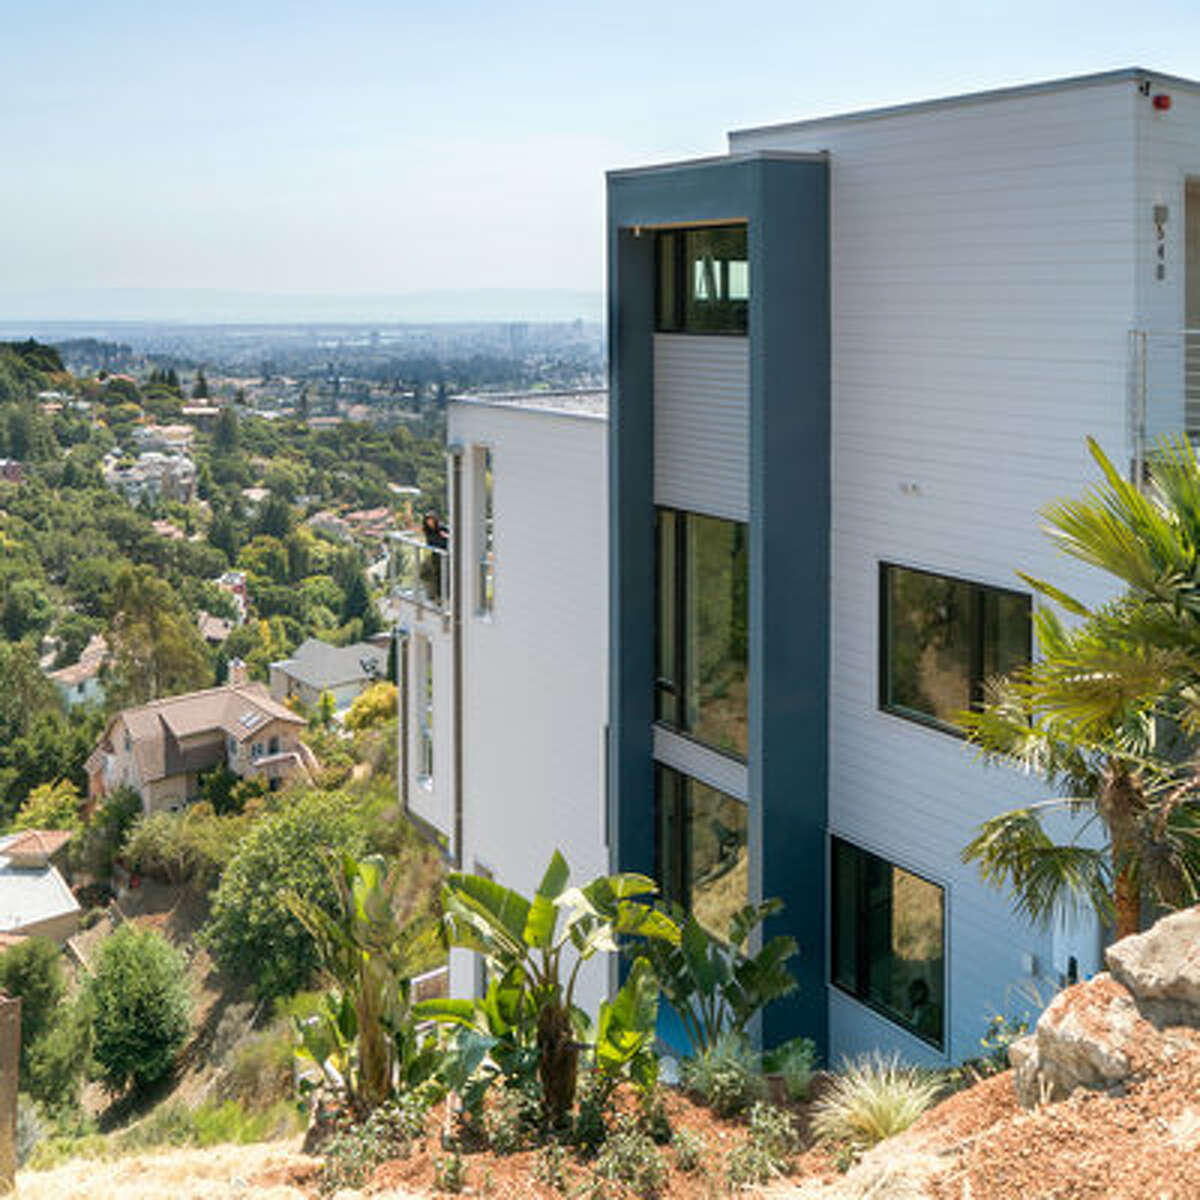 Next-level design As Sunset’s headquarters were relocating to Oakland in late 2015, a group of designers were a few miles away planning the magazine’s 2016 Idea House. Perched in the Claremont Hills bordering Oakland and Berkeley, the home was conceived as a tribute to the Bay Area—its architecture, its quirky character, its spirit of innovation. Facilitated by DFI Properties and Keith Kolker of Landmark Development, architect Robert Nebolon created a five-level, 3,600-square-foot cantilevered home clad in James Hardie siding. To warm up the modern shell, interior designer Lauren Geremia and her team, Emily Ord and Erin O’Brien, mixed ATGStores.com furnishings and paint with vintage items and statement-making pieces by Western artists. The result is a home that feels like a retreat—and offers design ideas around every corner.